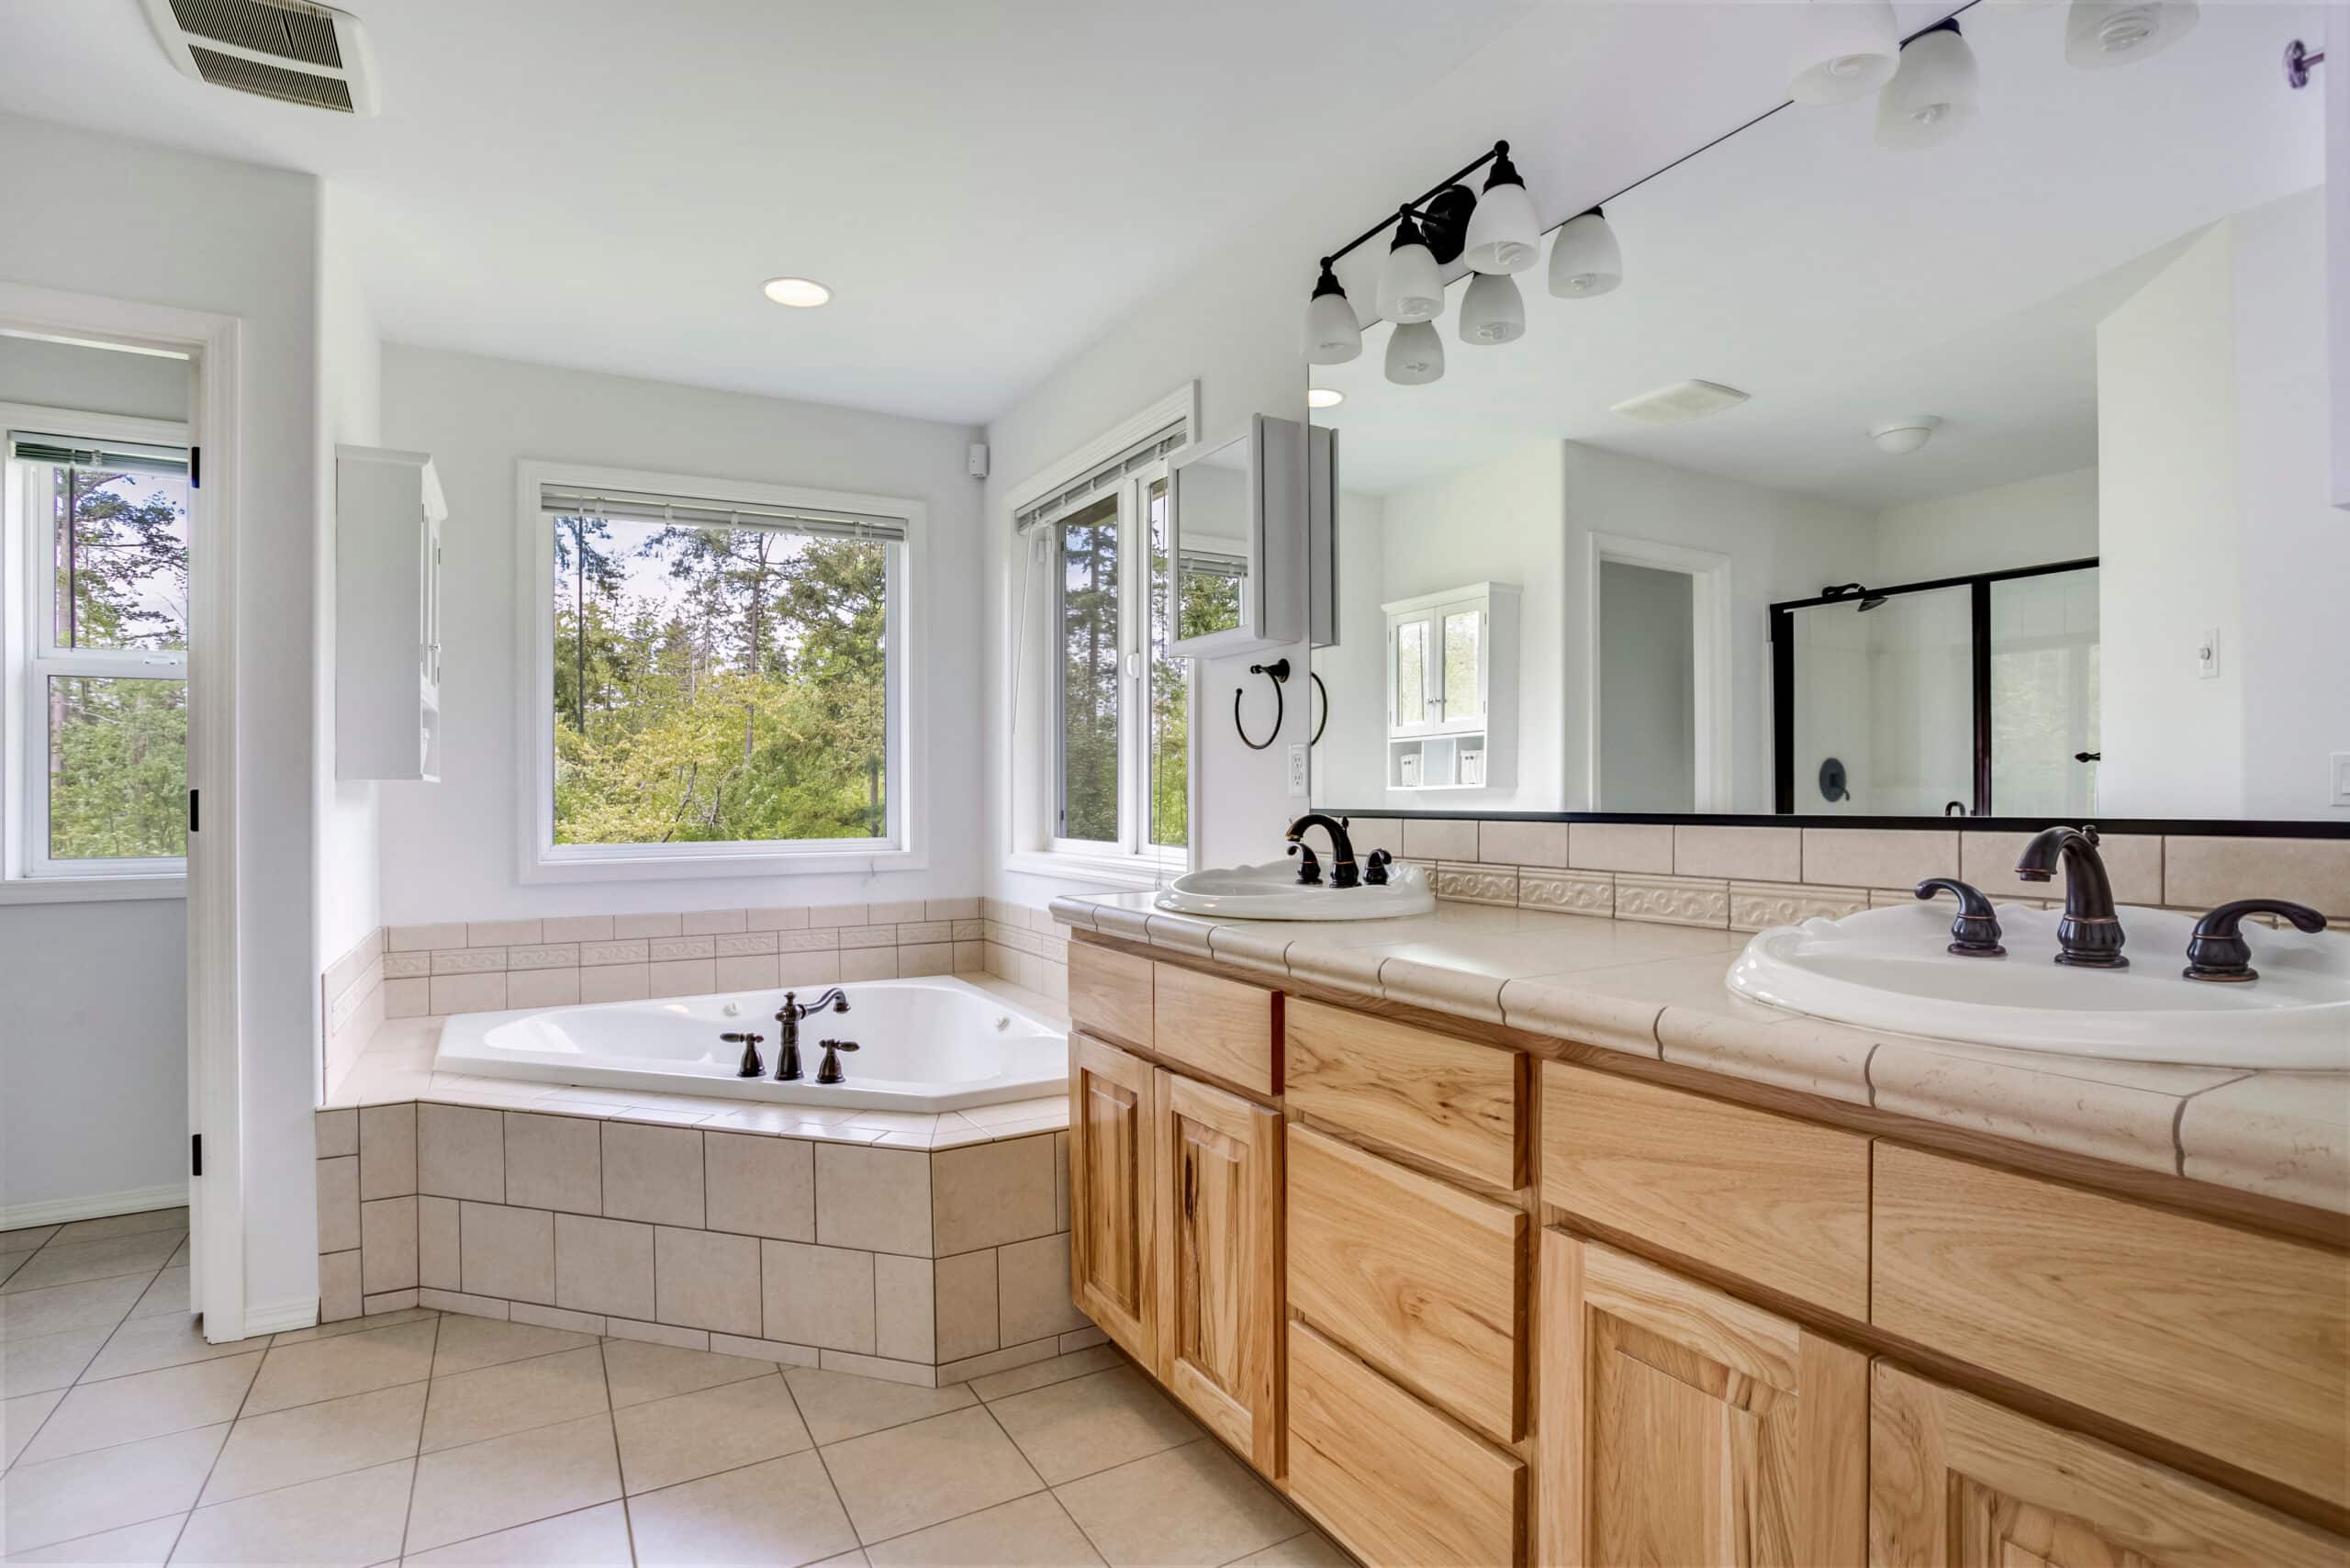 Traditional style bathroom with double sink wooden vanity, tiles, and a bath tub